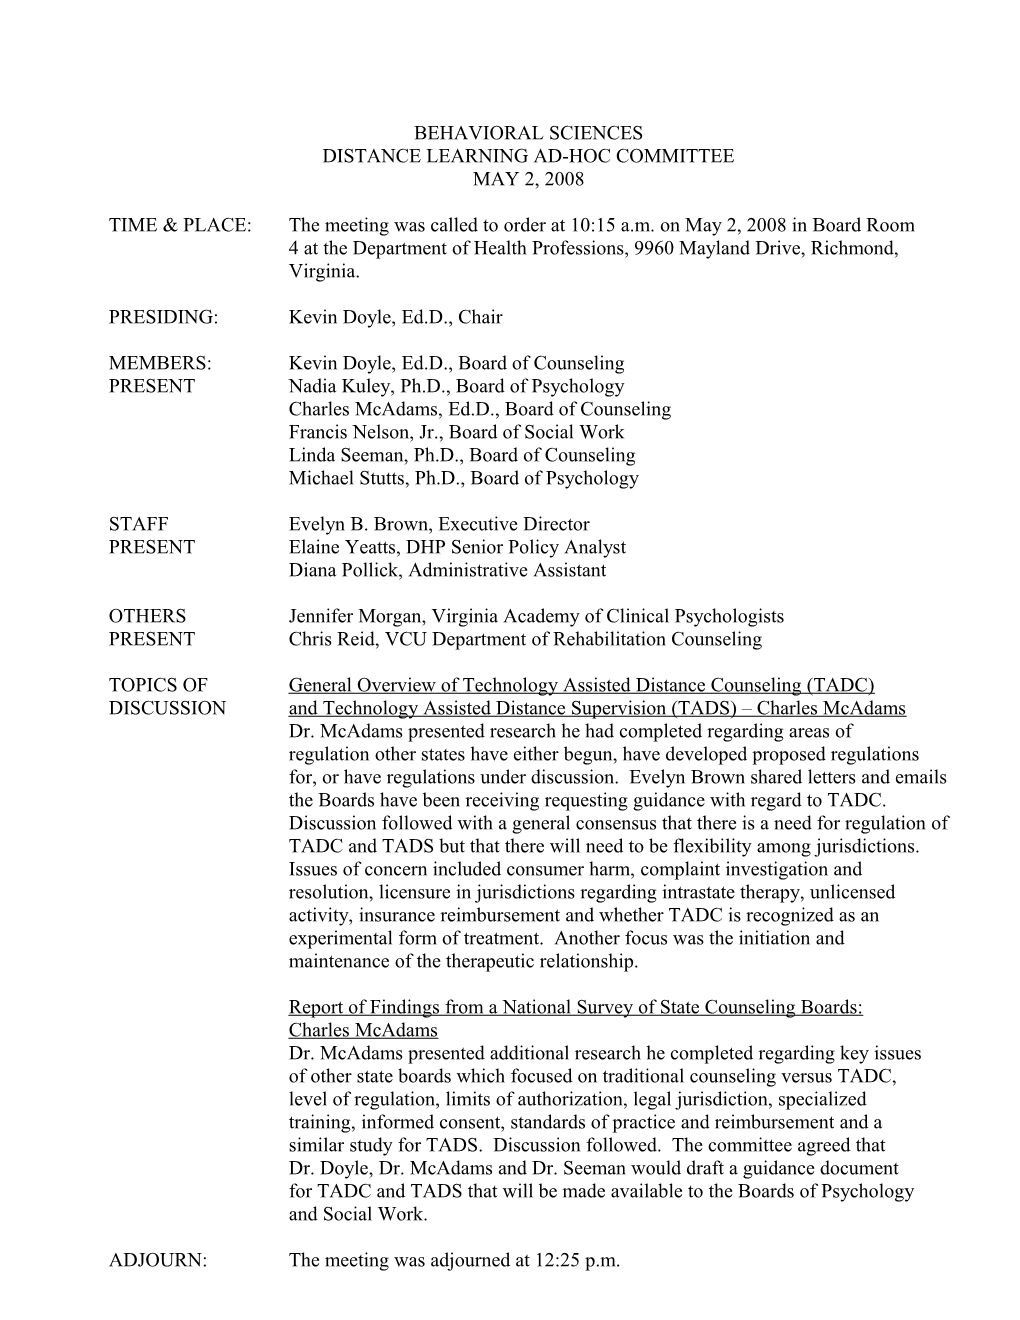 Behavioral Sciences Distance Learning Ad-Hoc Committee May 2, 2008